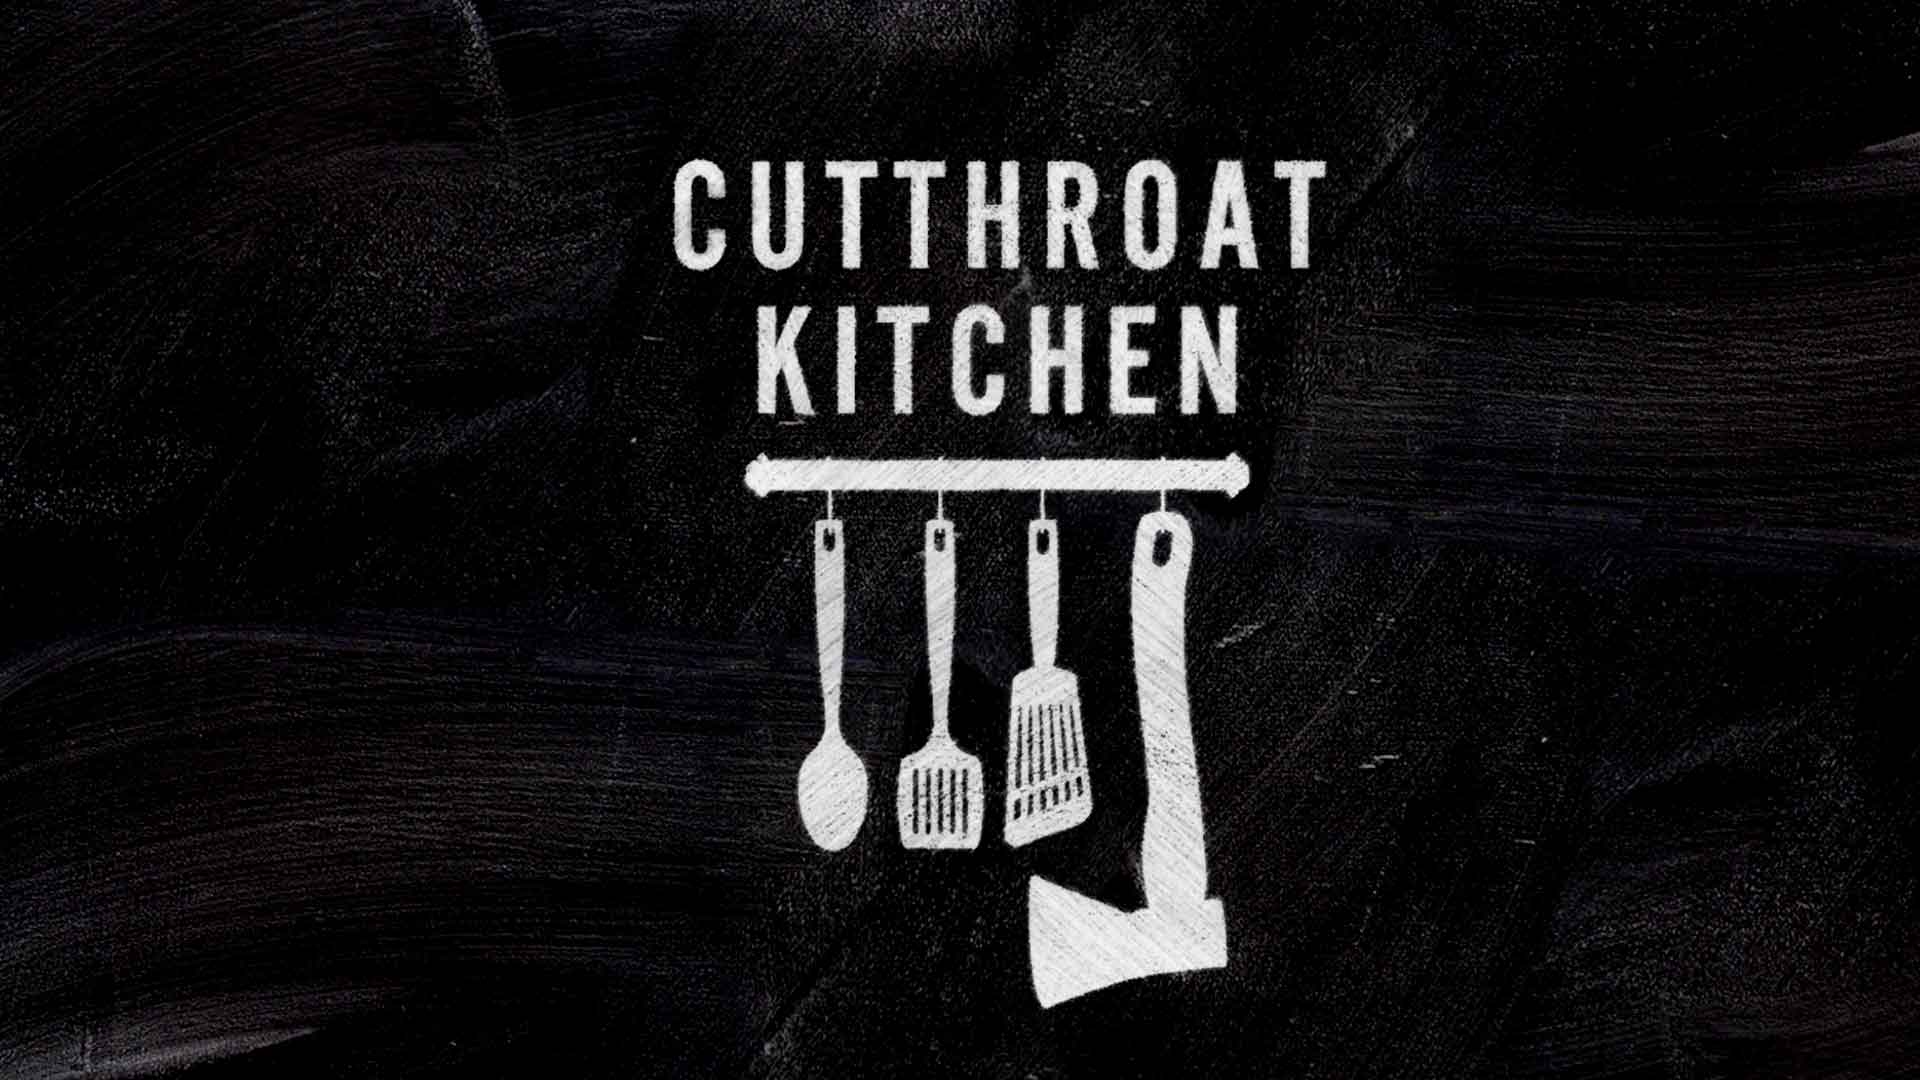 New Season Of Food Networks Cutthroat Kitchen Now Casting Special Episodes Auditions Free